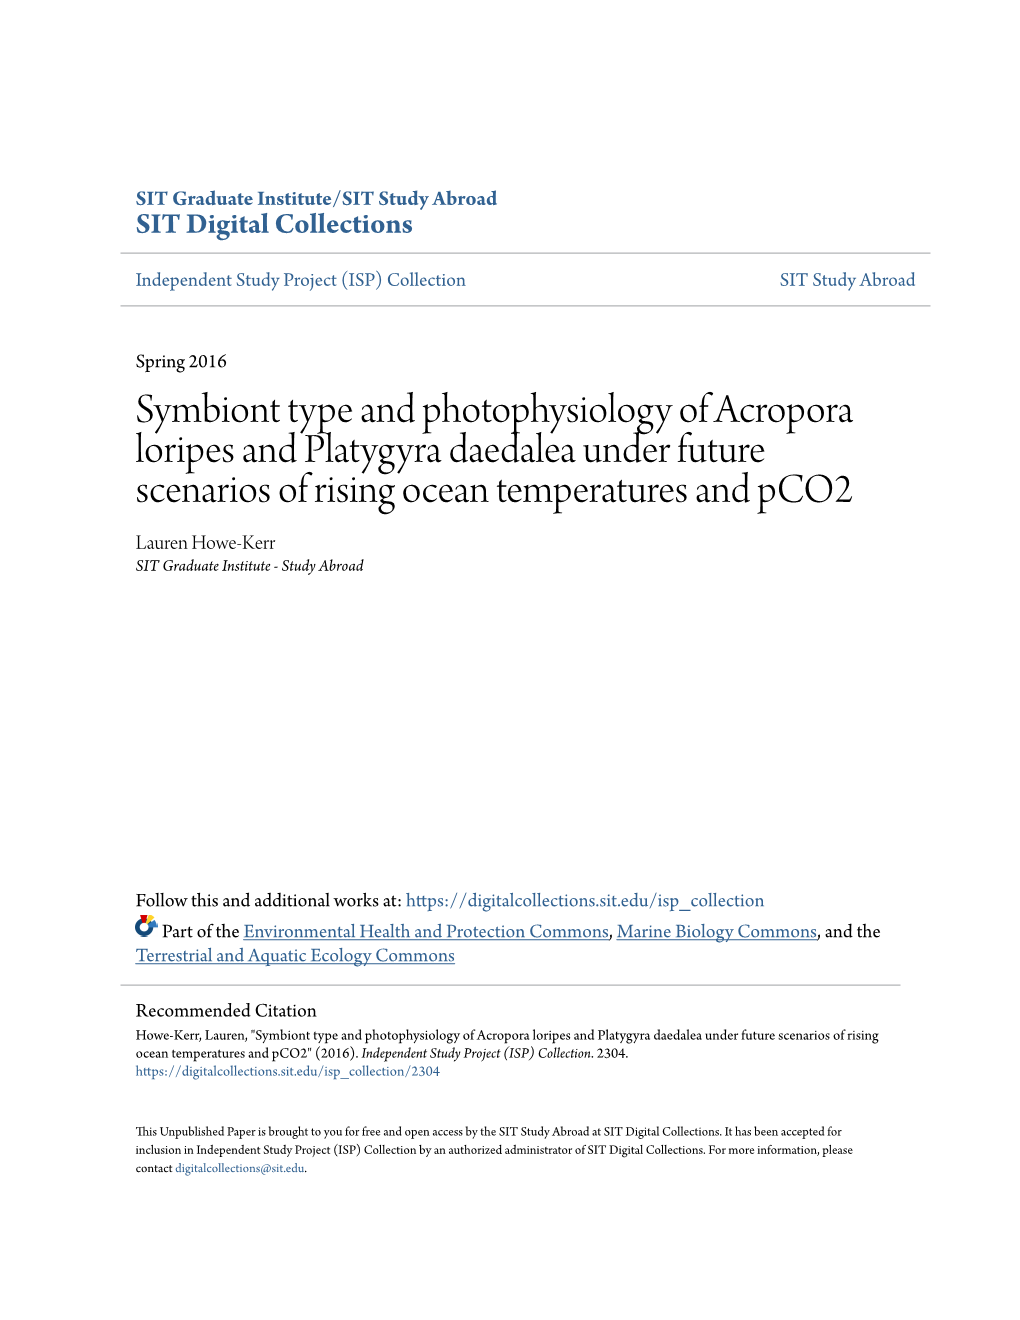 Symbiont Type and Photophysiology of Acropora Loripes and Platygyra